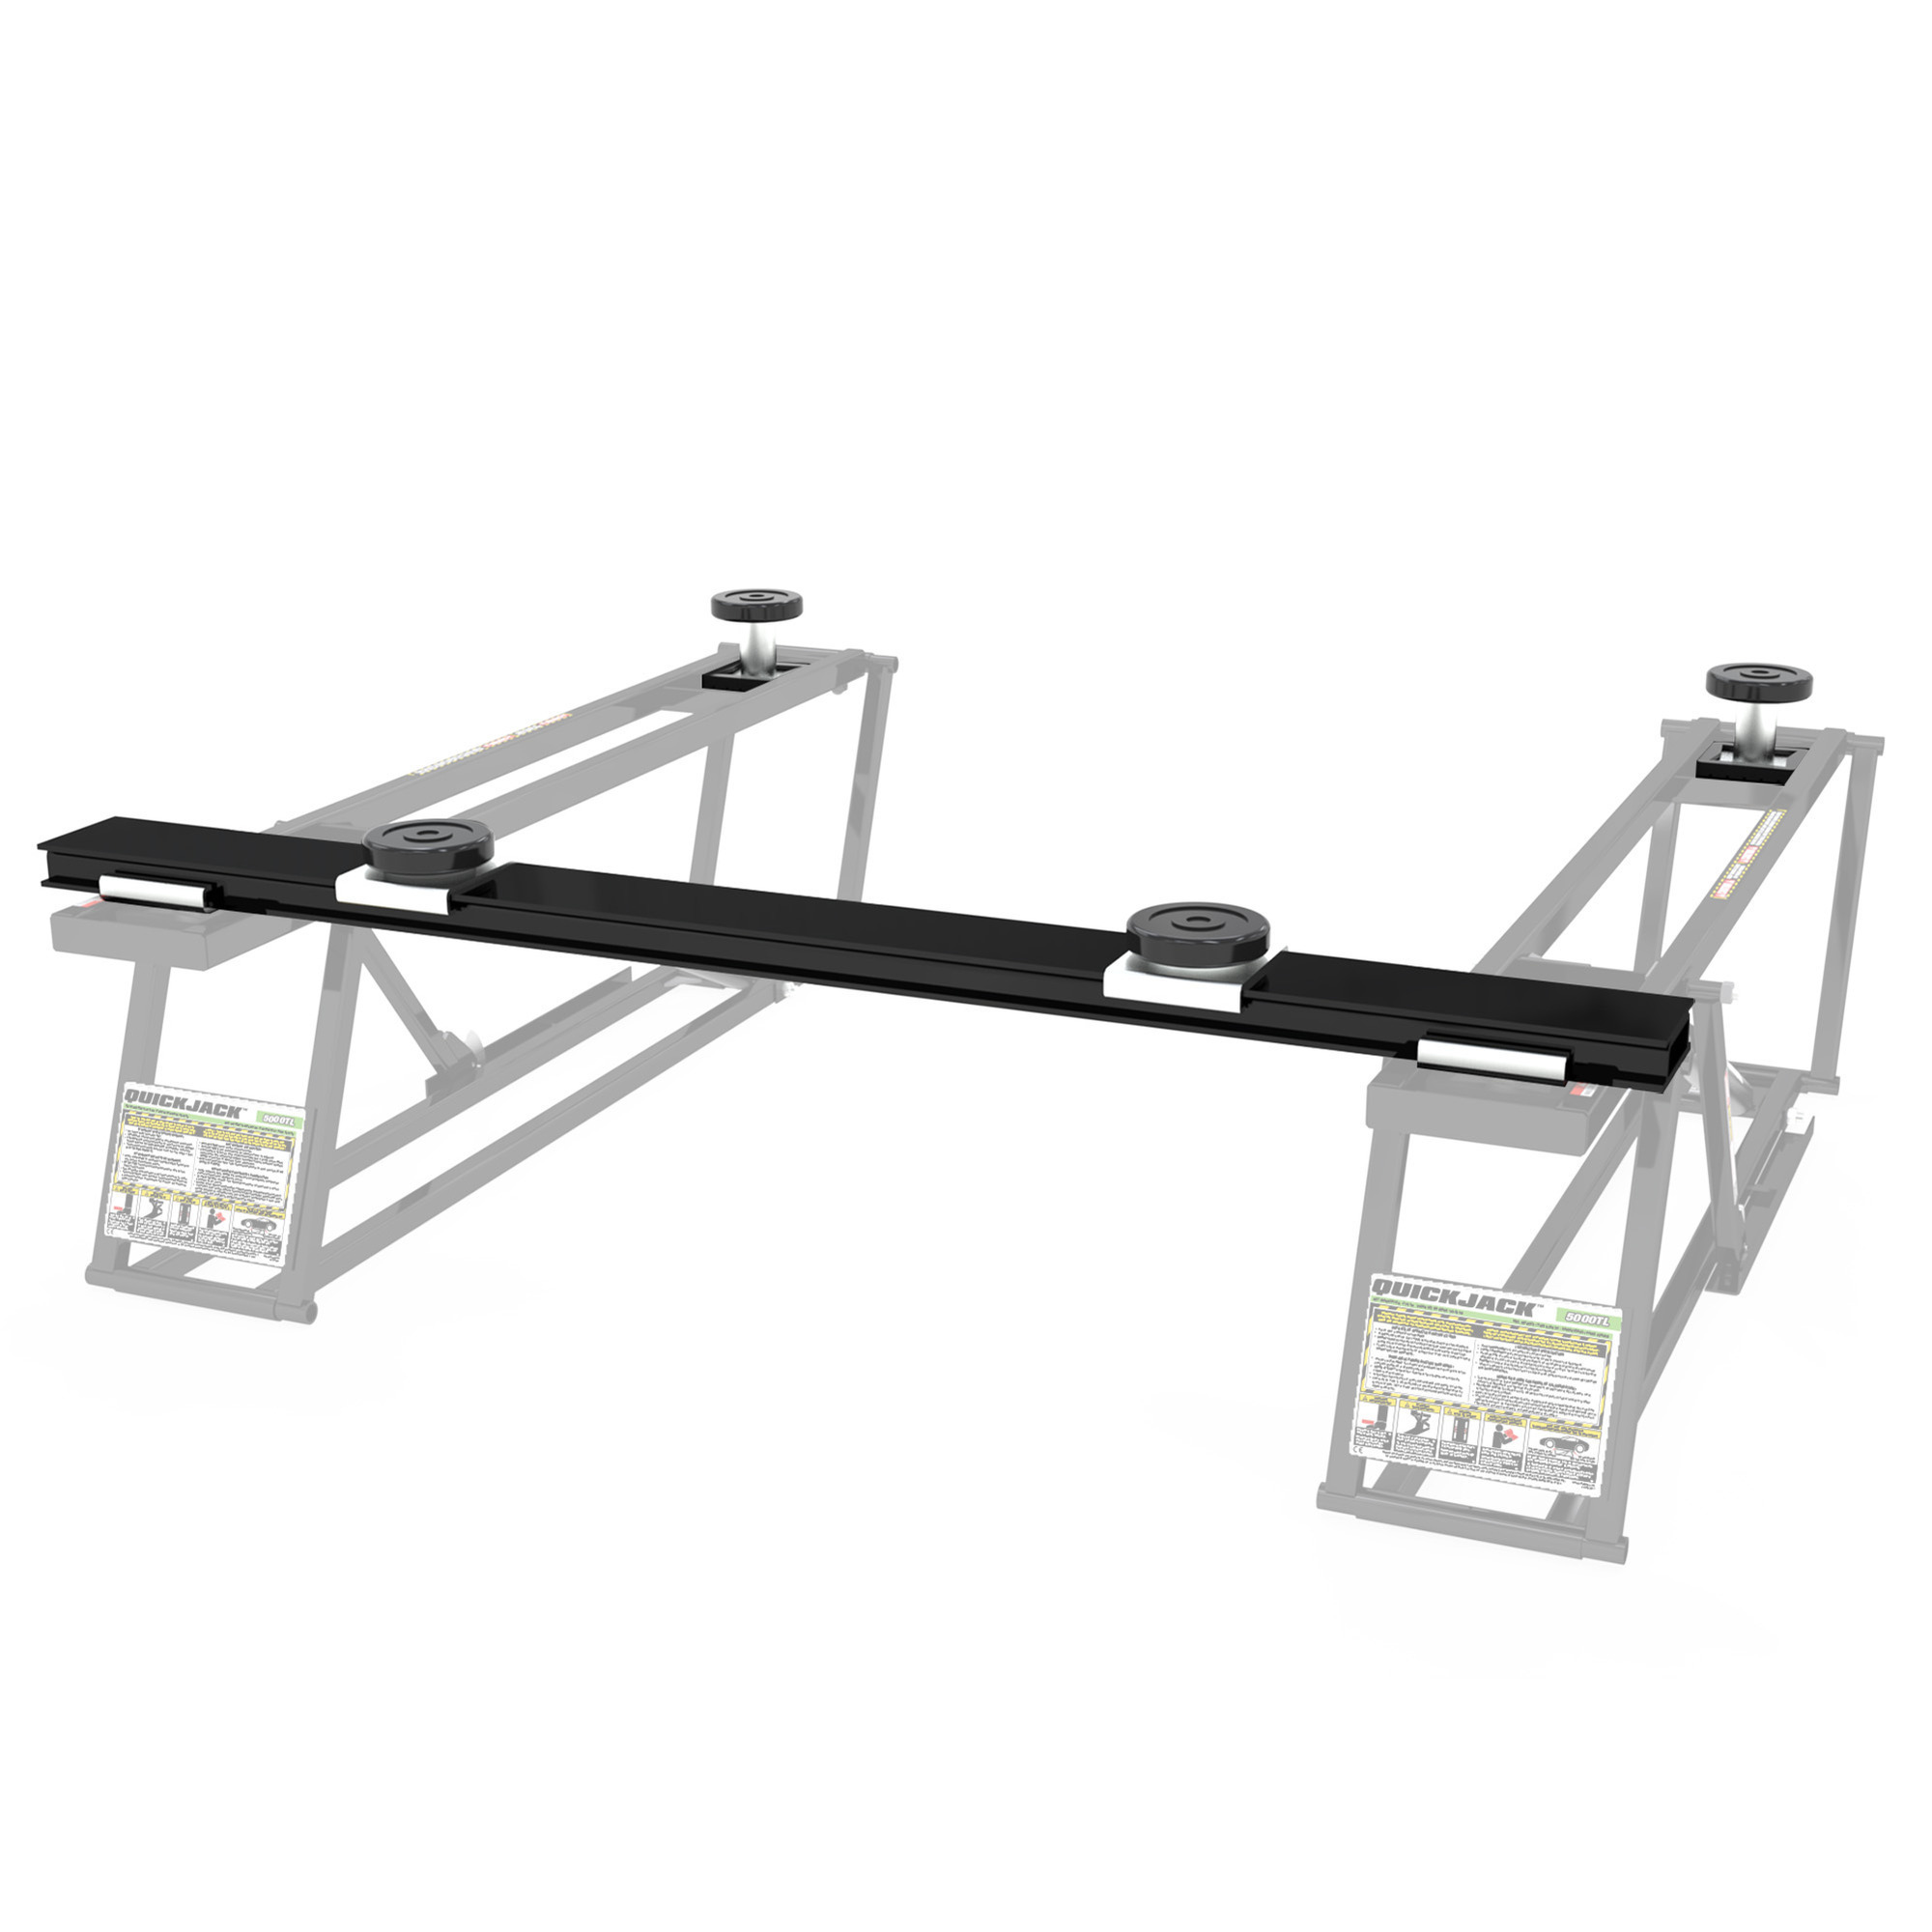 QuickJack, The Quick Jack Crossbeam Adapter Set Frame, Capacity 5000 lb, Included (qty.) 9 Model 5215865